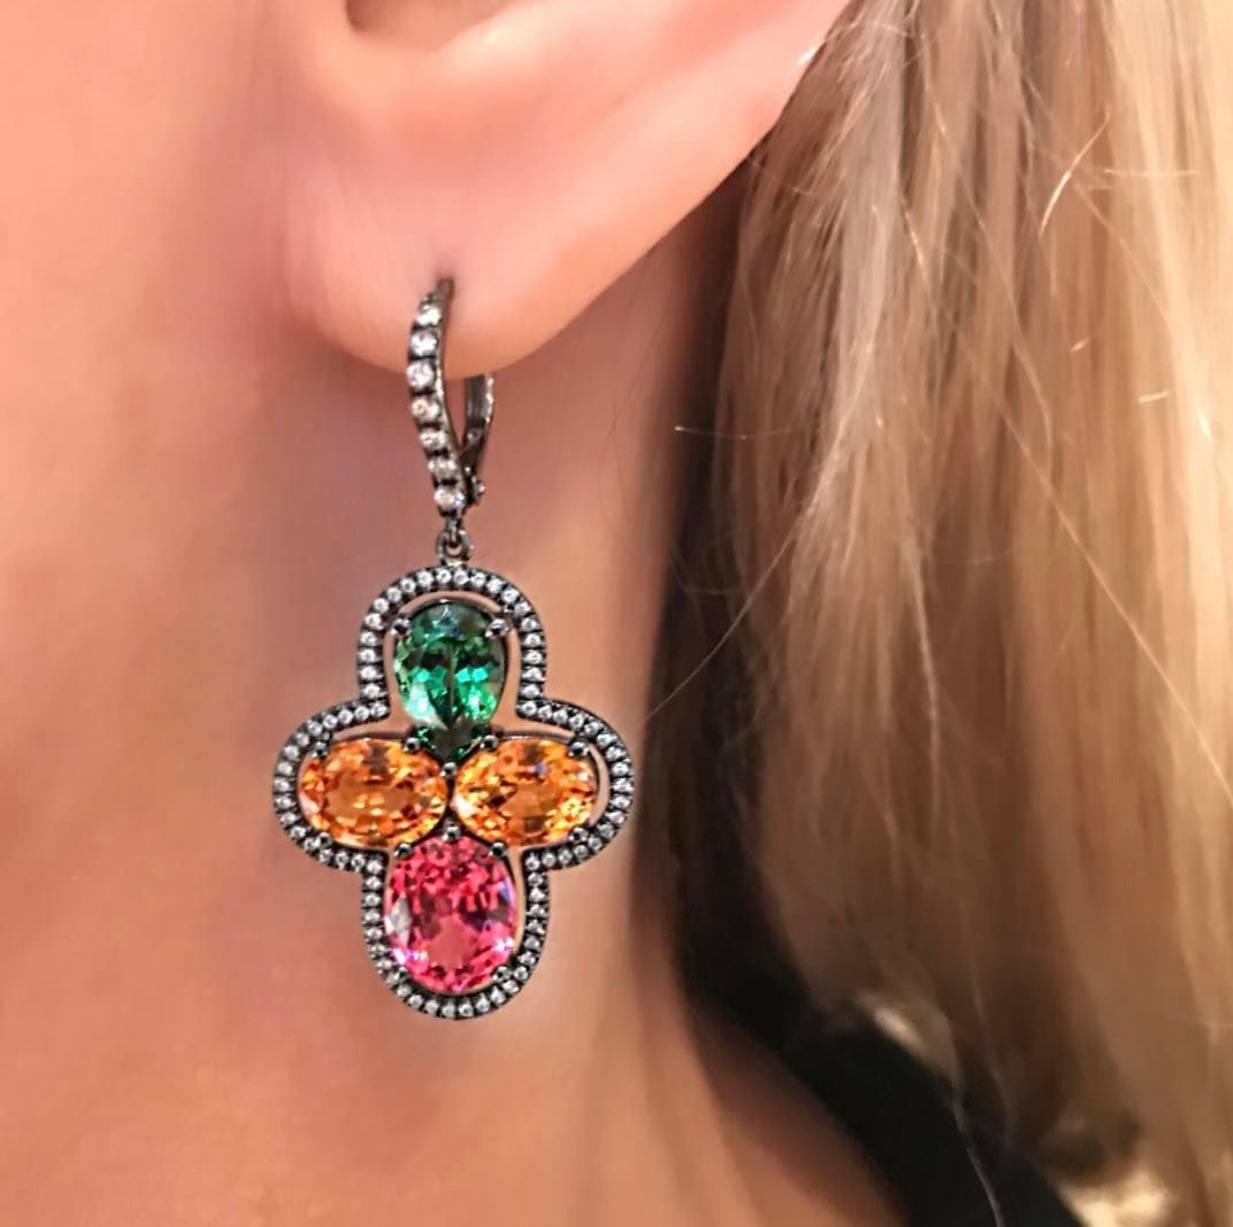 18 K white Gold Earrings, with Green Garnet, Orange  Garnet and Neon Pink Spinels, Surrounded with white Diamonds, Black Rhodium Plated.
The earrings have very dynamic color combination:  Neon Pink Spinel, Orange Garnet and Green Garnet, can be worn